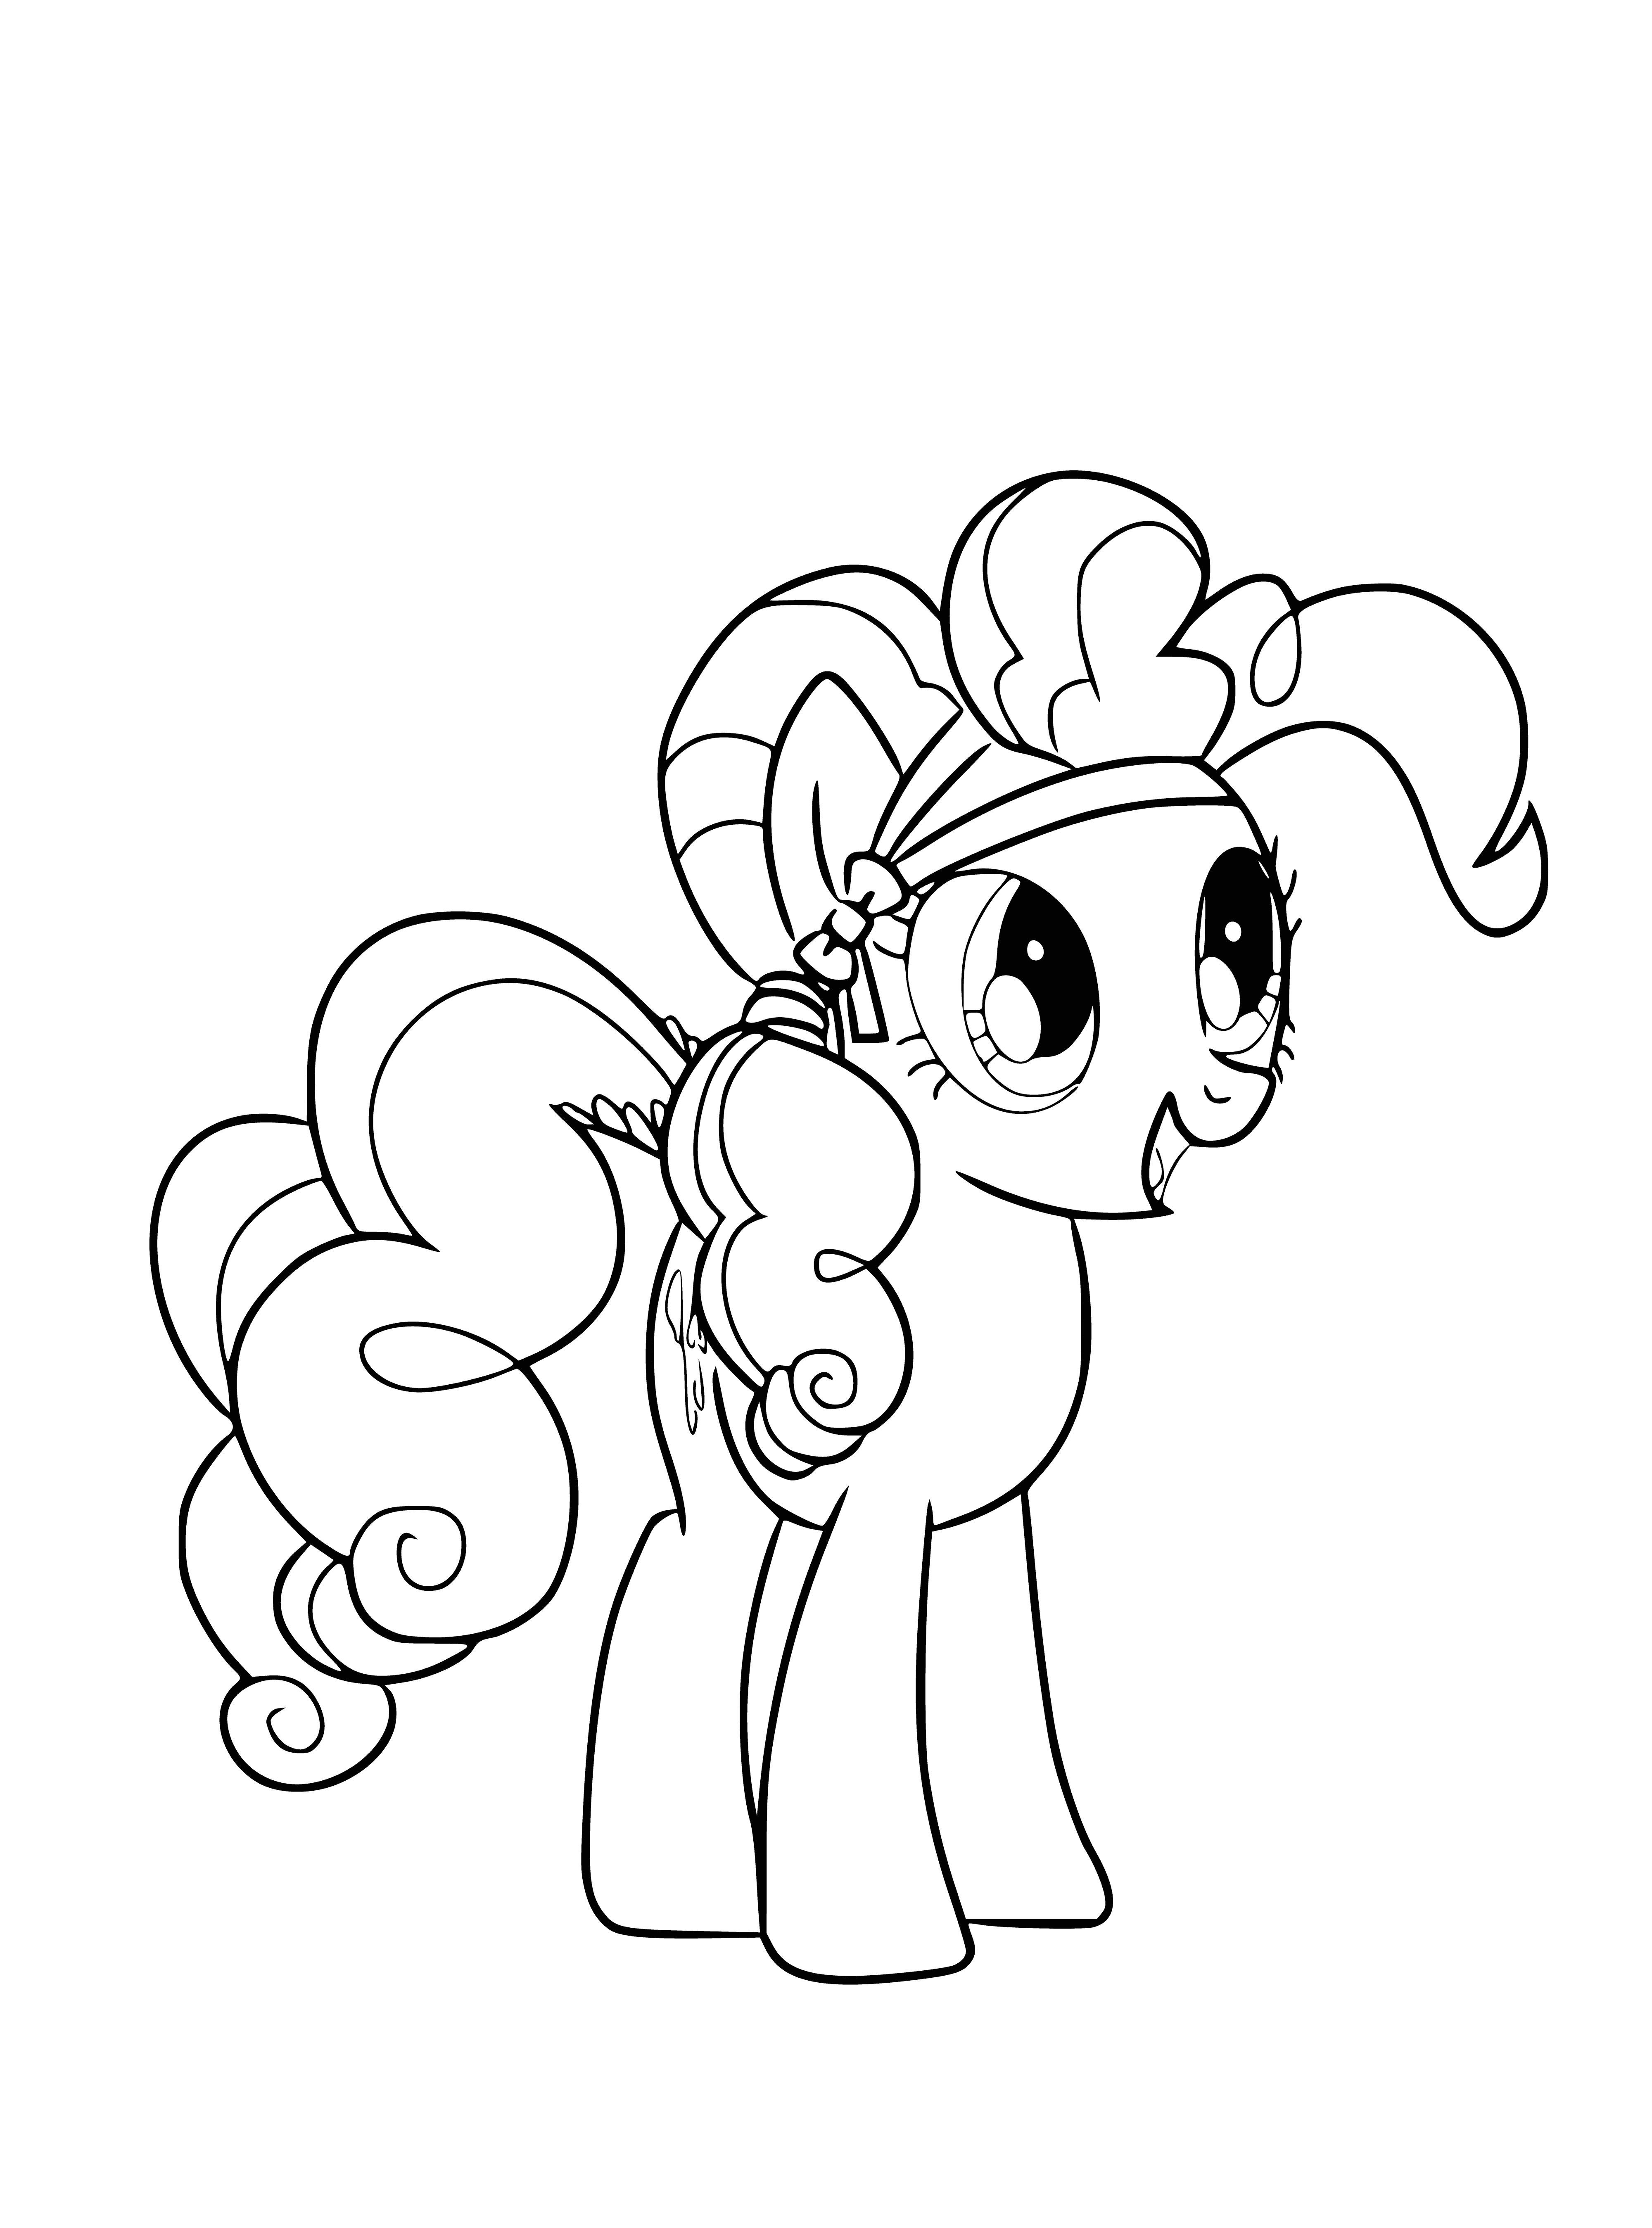 coloring page: She loves to play games and have parties with her friends.

Pink pony with curly mane/tail loves playing games/having parties. Cutie mark is 3 pink balloons!